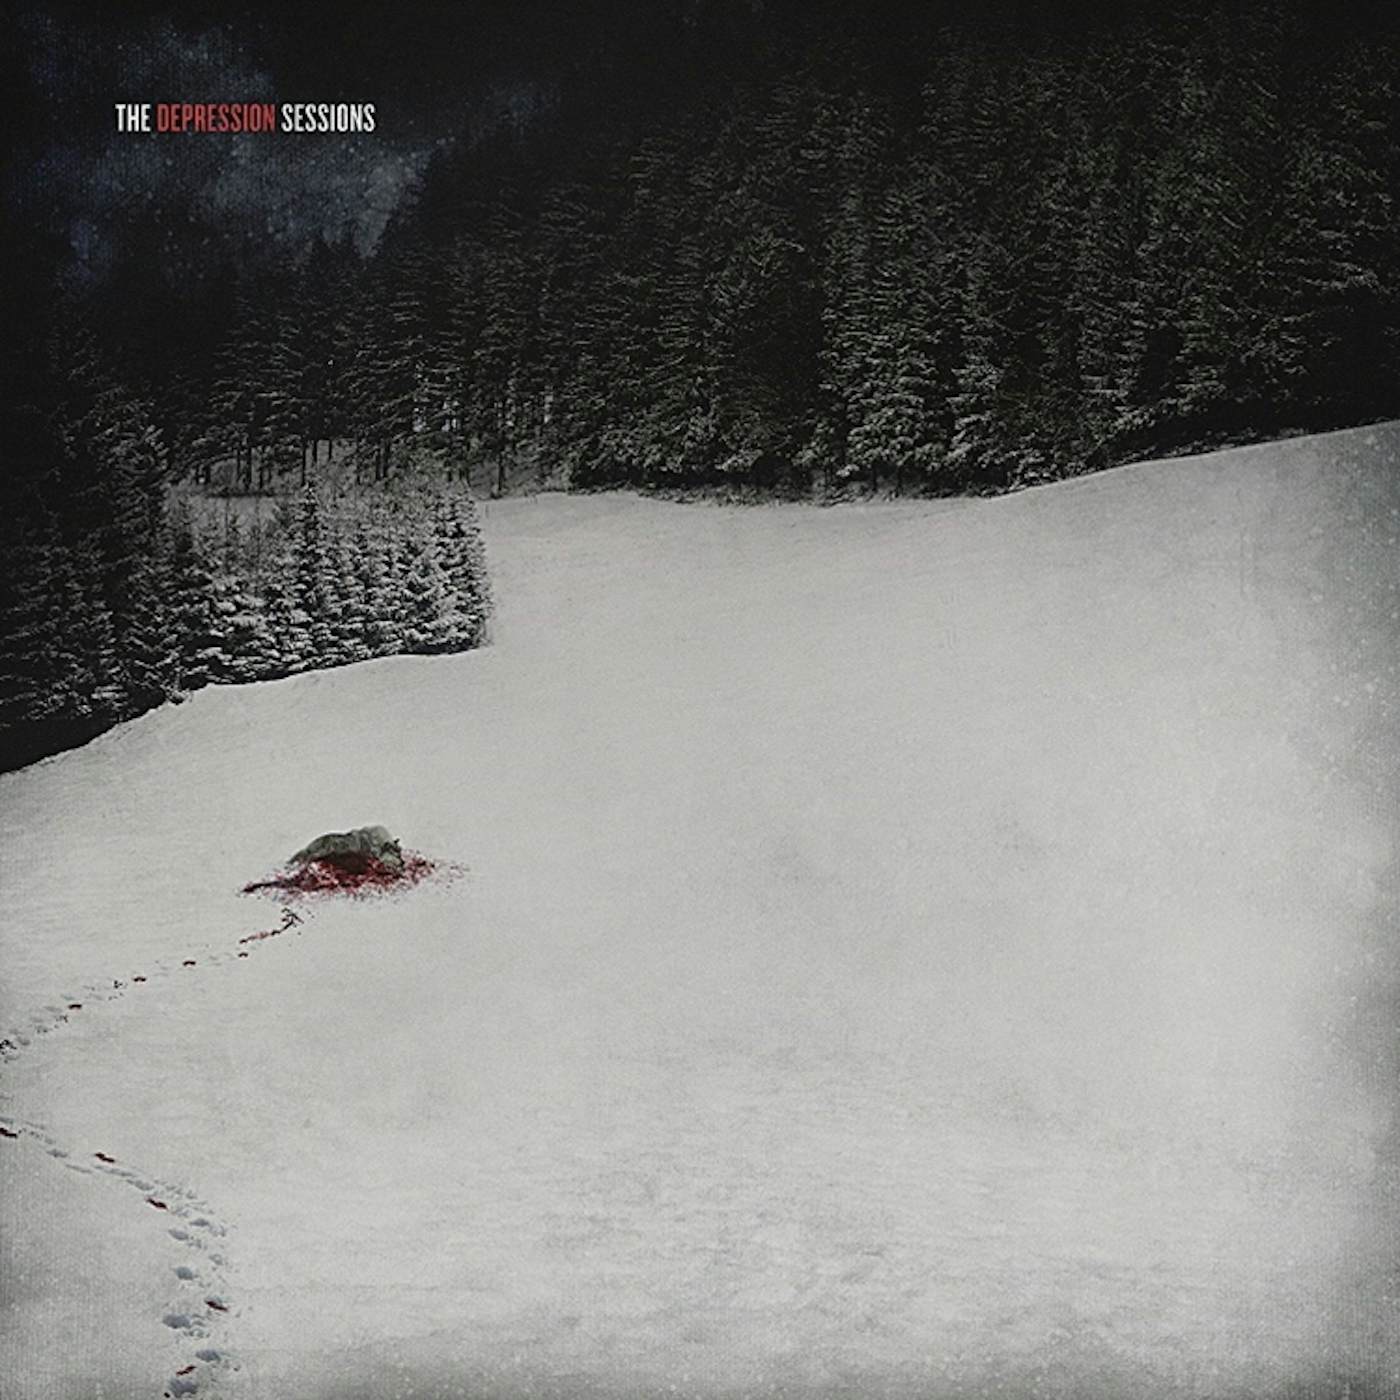 DEPRESSION SESSIONS FEAT: THY ART IS MURDER / VAR